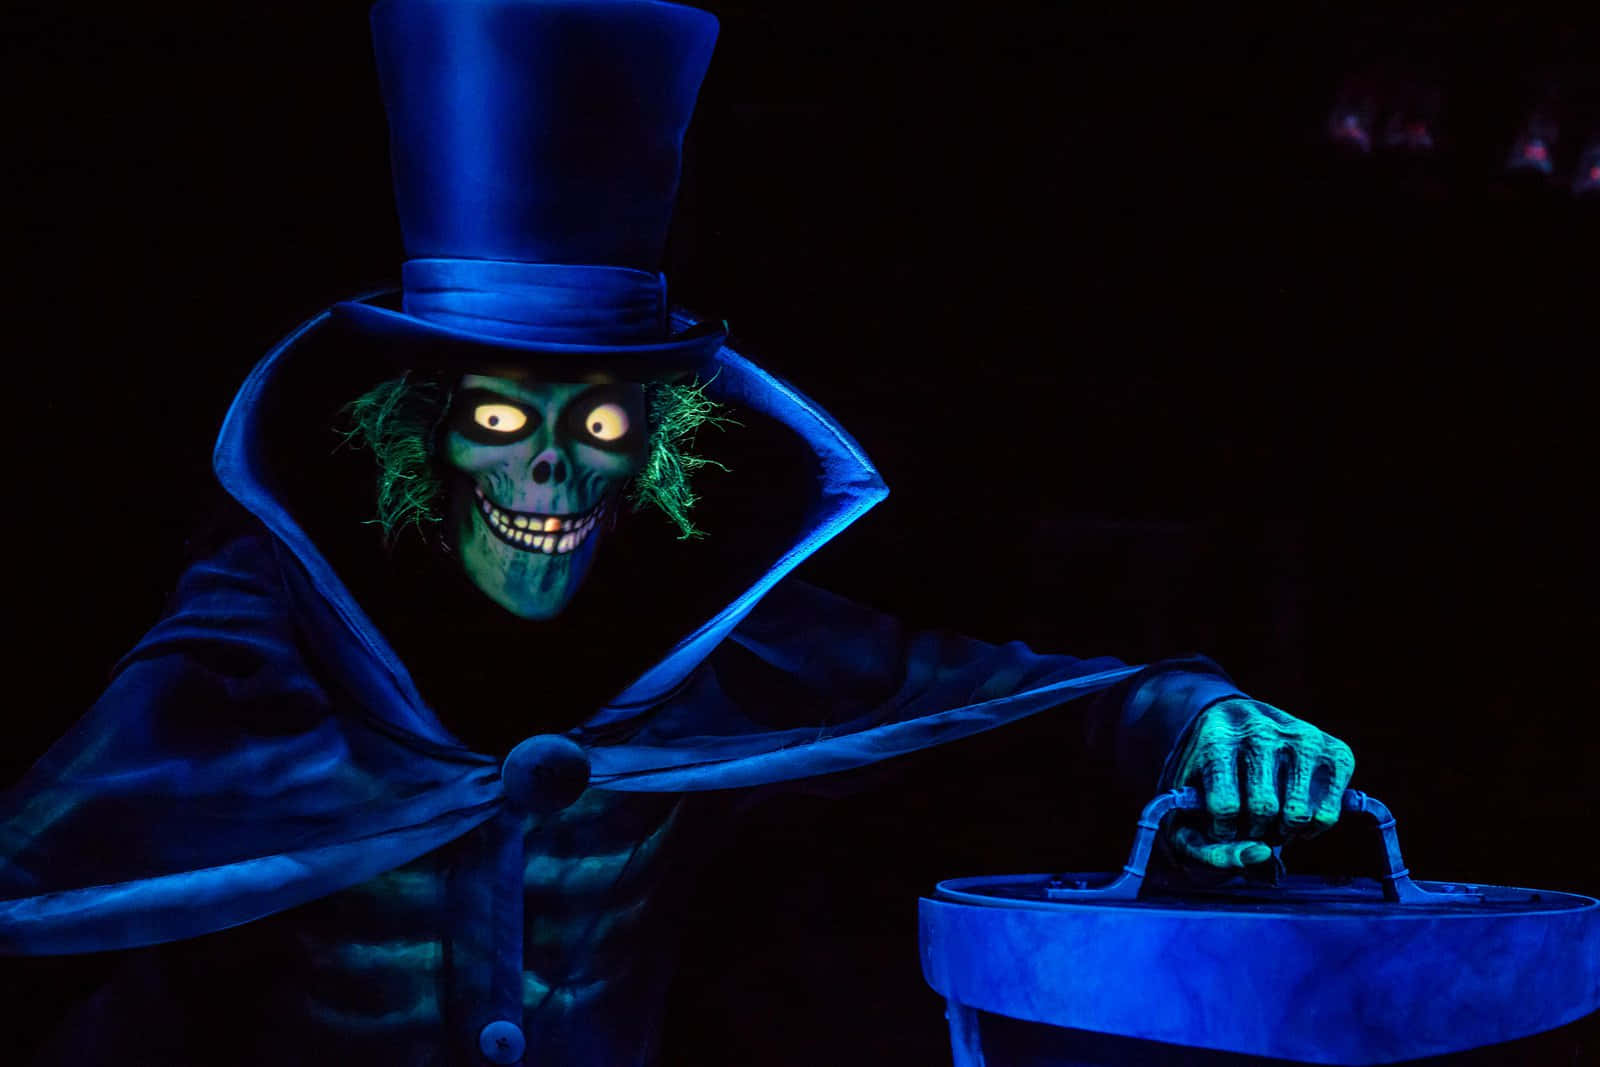 "Take a Nightly Tour of the Haunted Mansion"